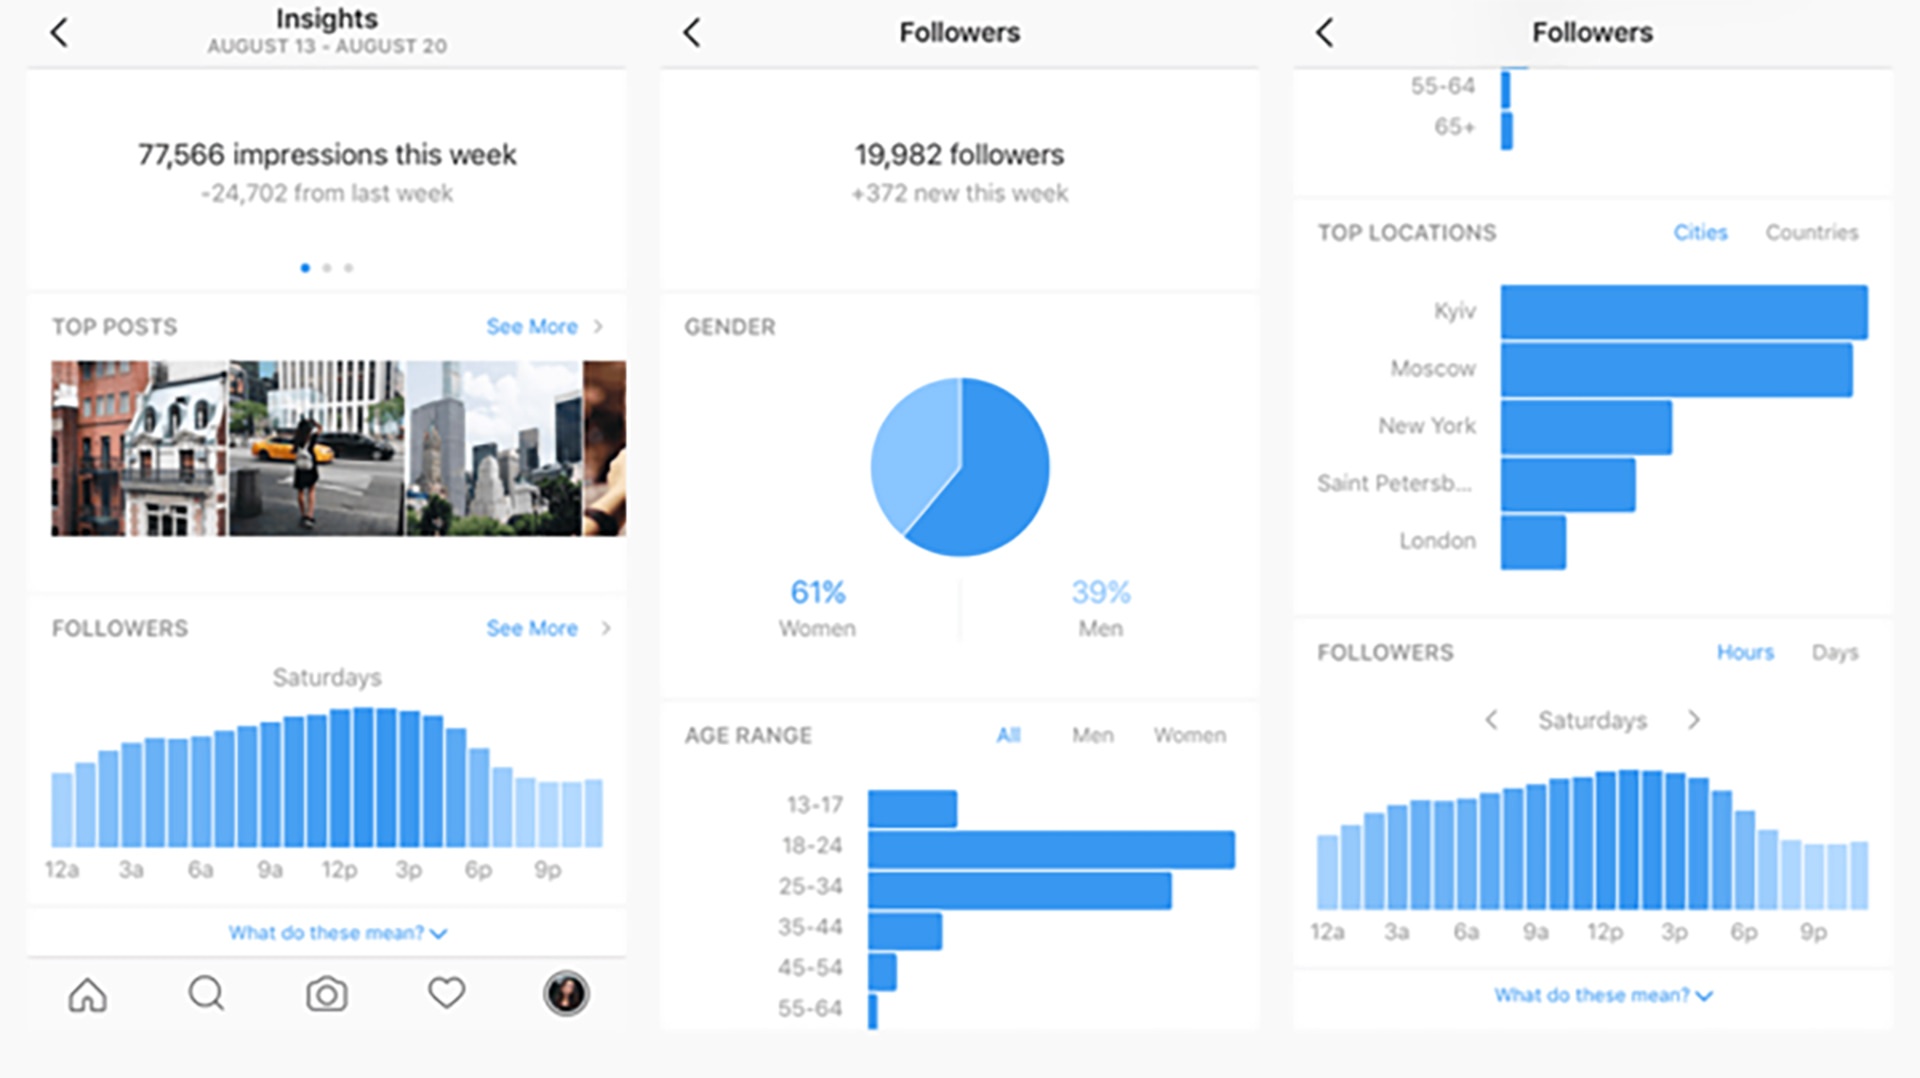 Data about Instagram posts from Insights